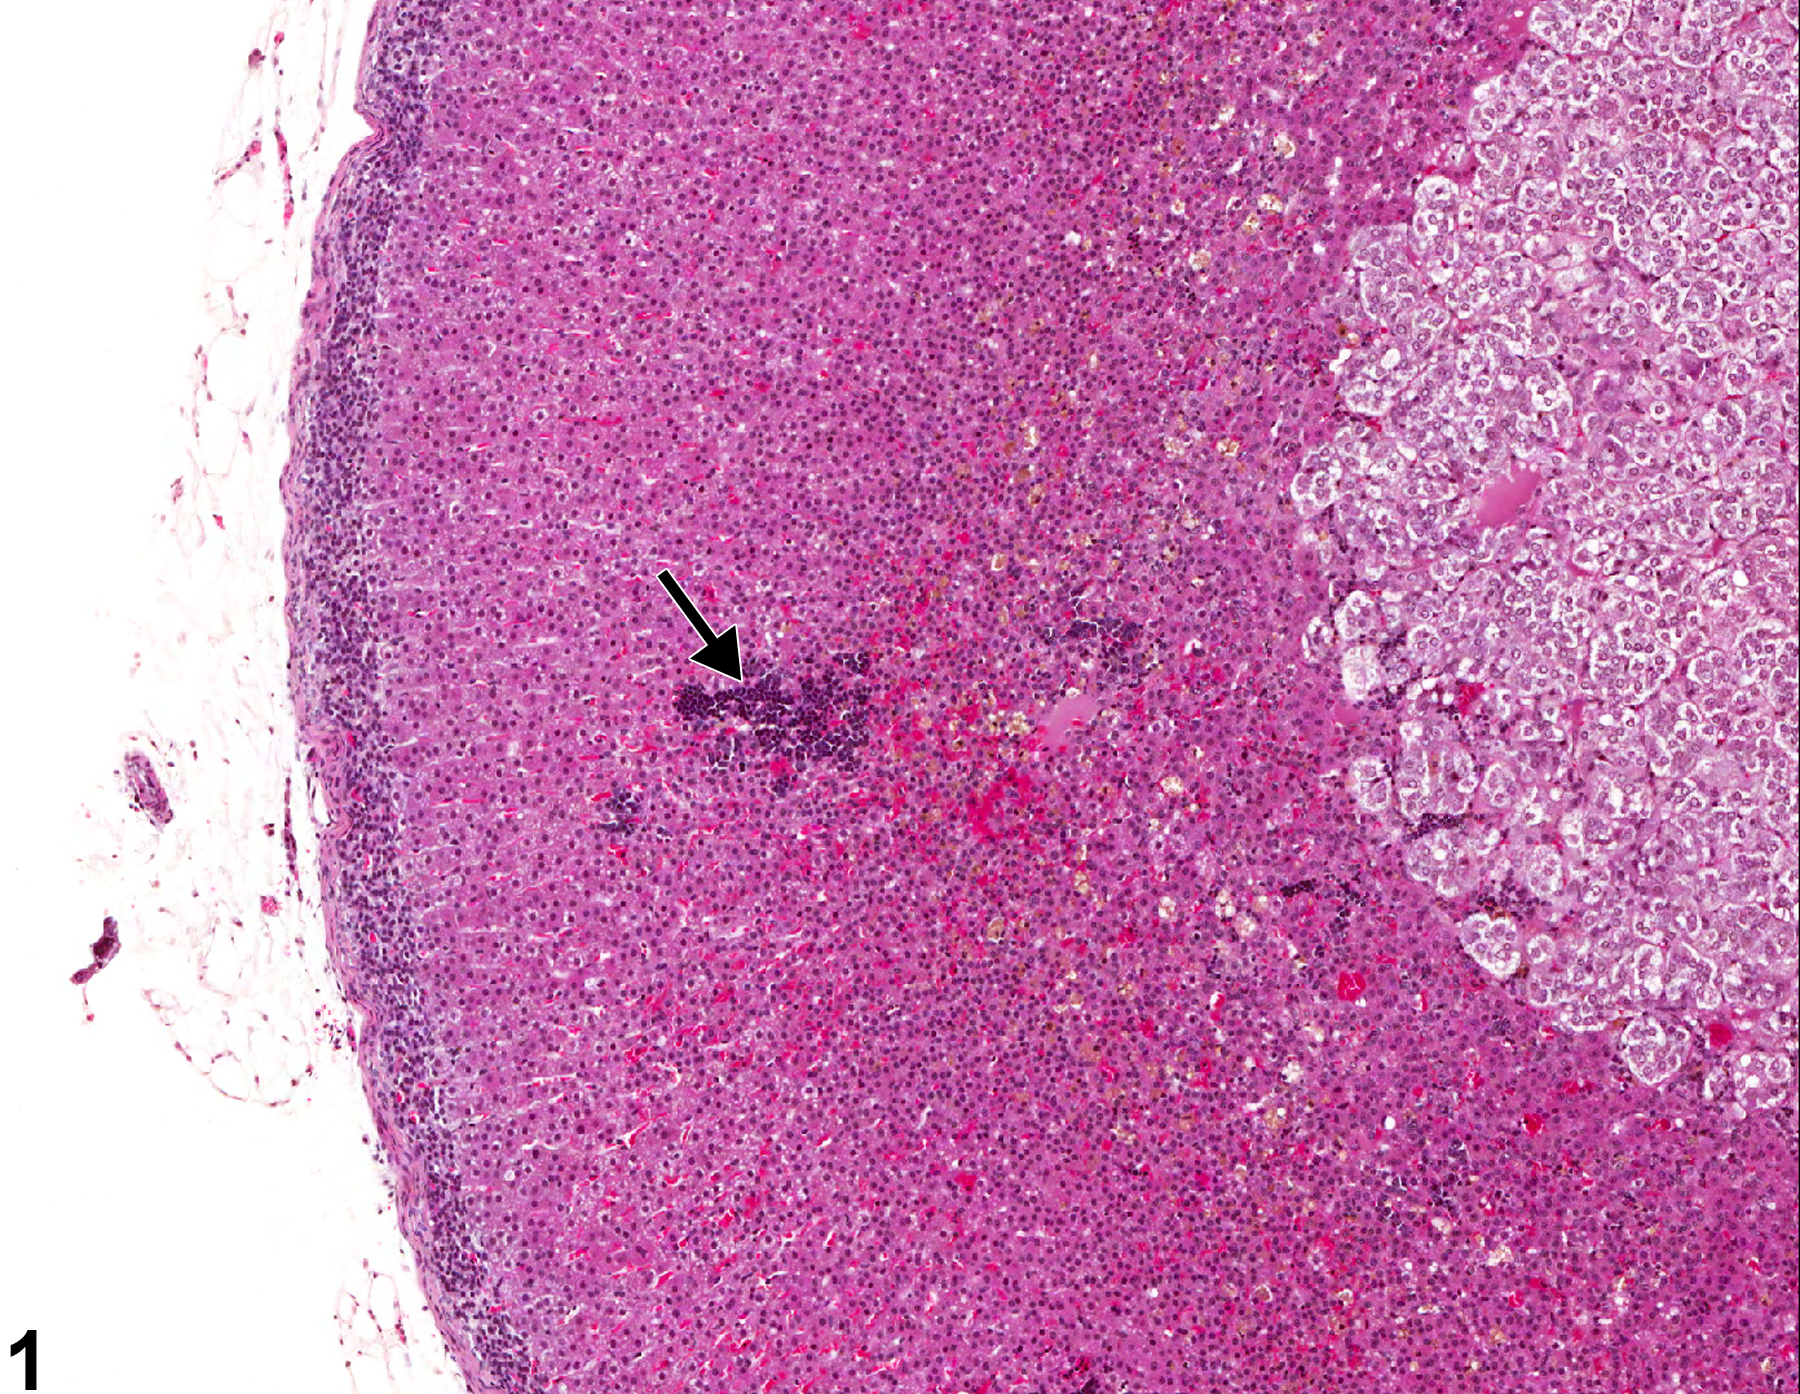 Image of extramedullary hematopoiesis in the adrenal gland from a female F344/N rat in a chronic study